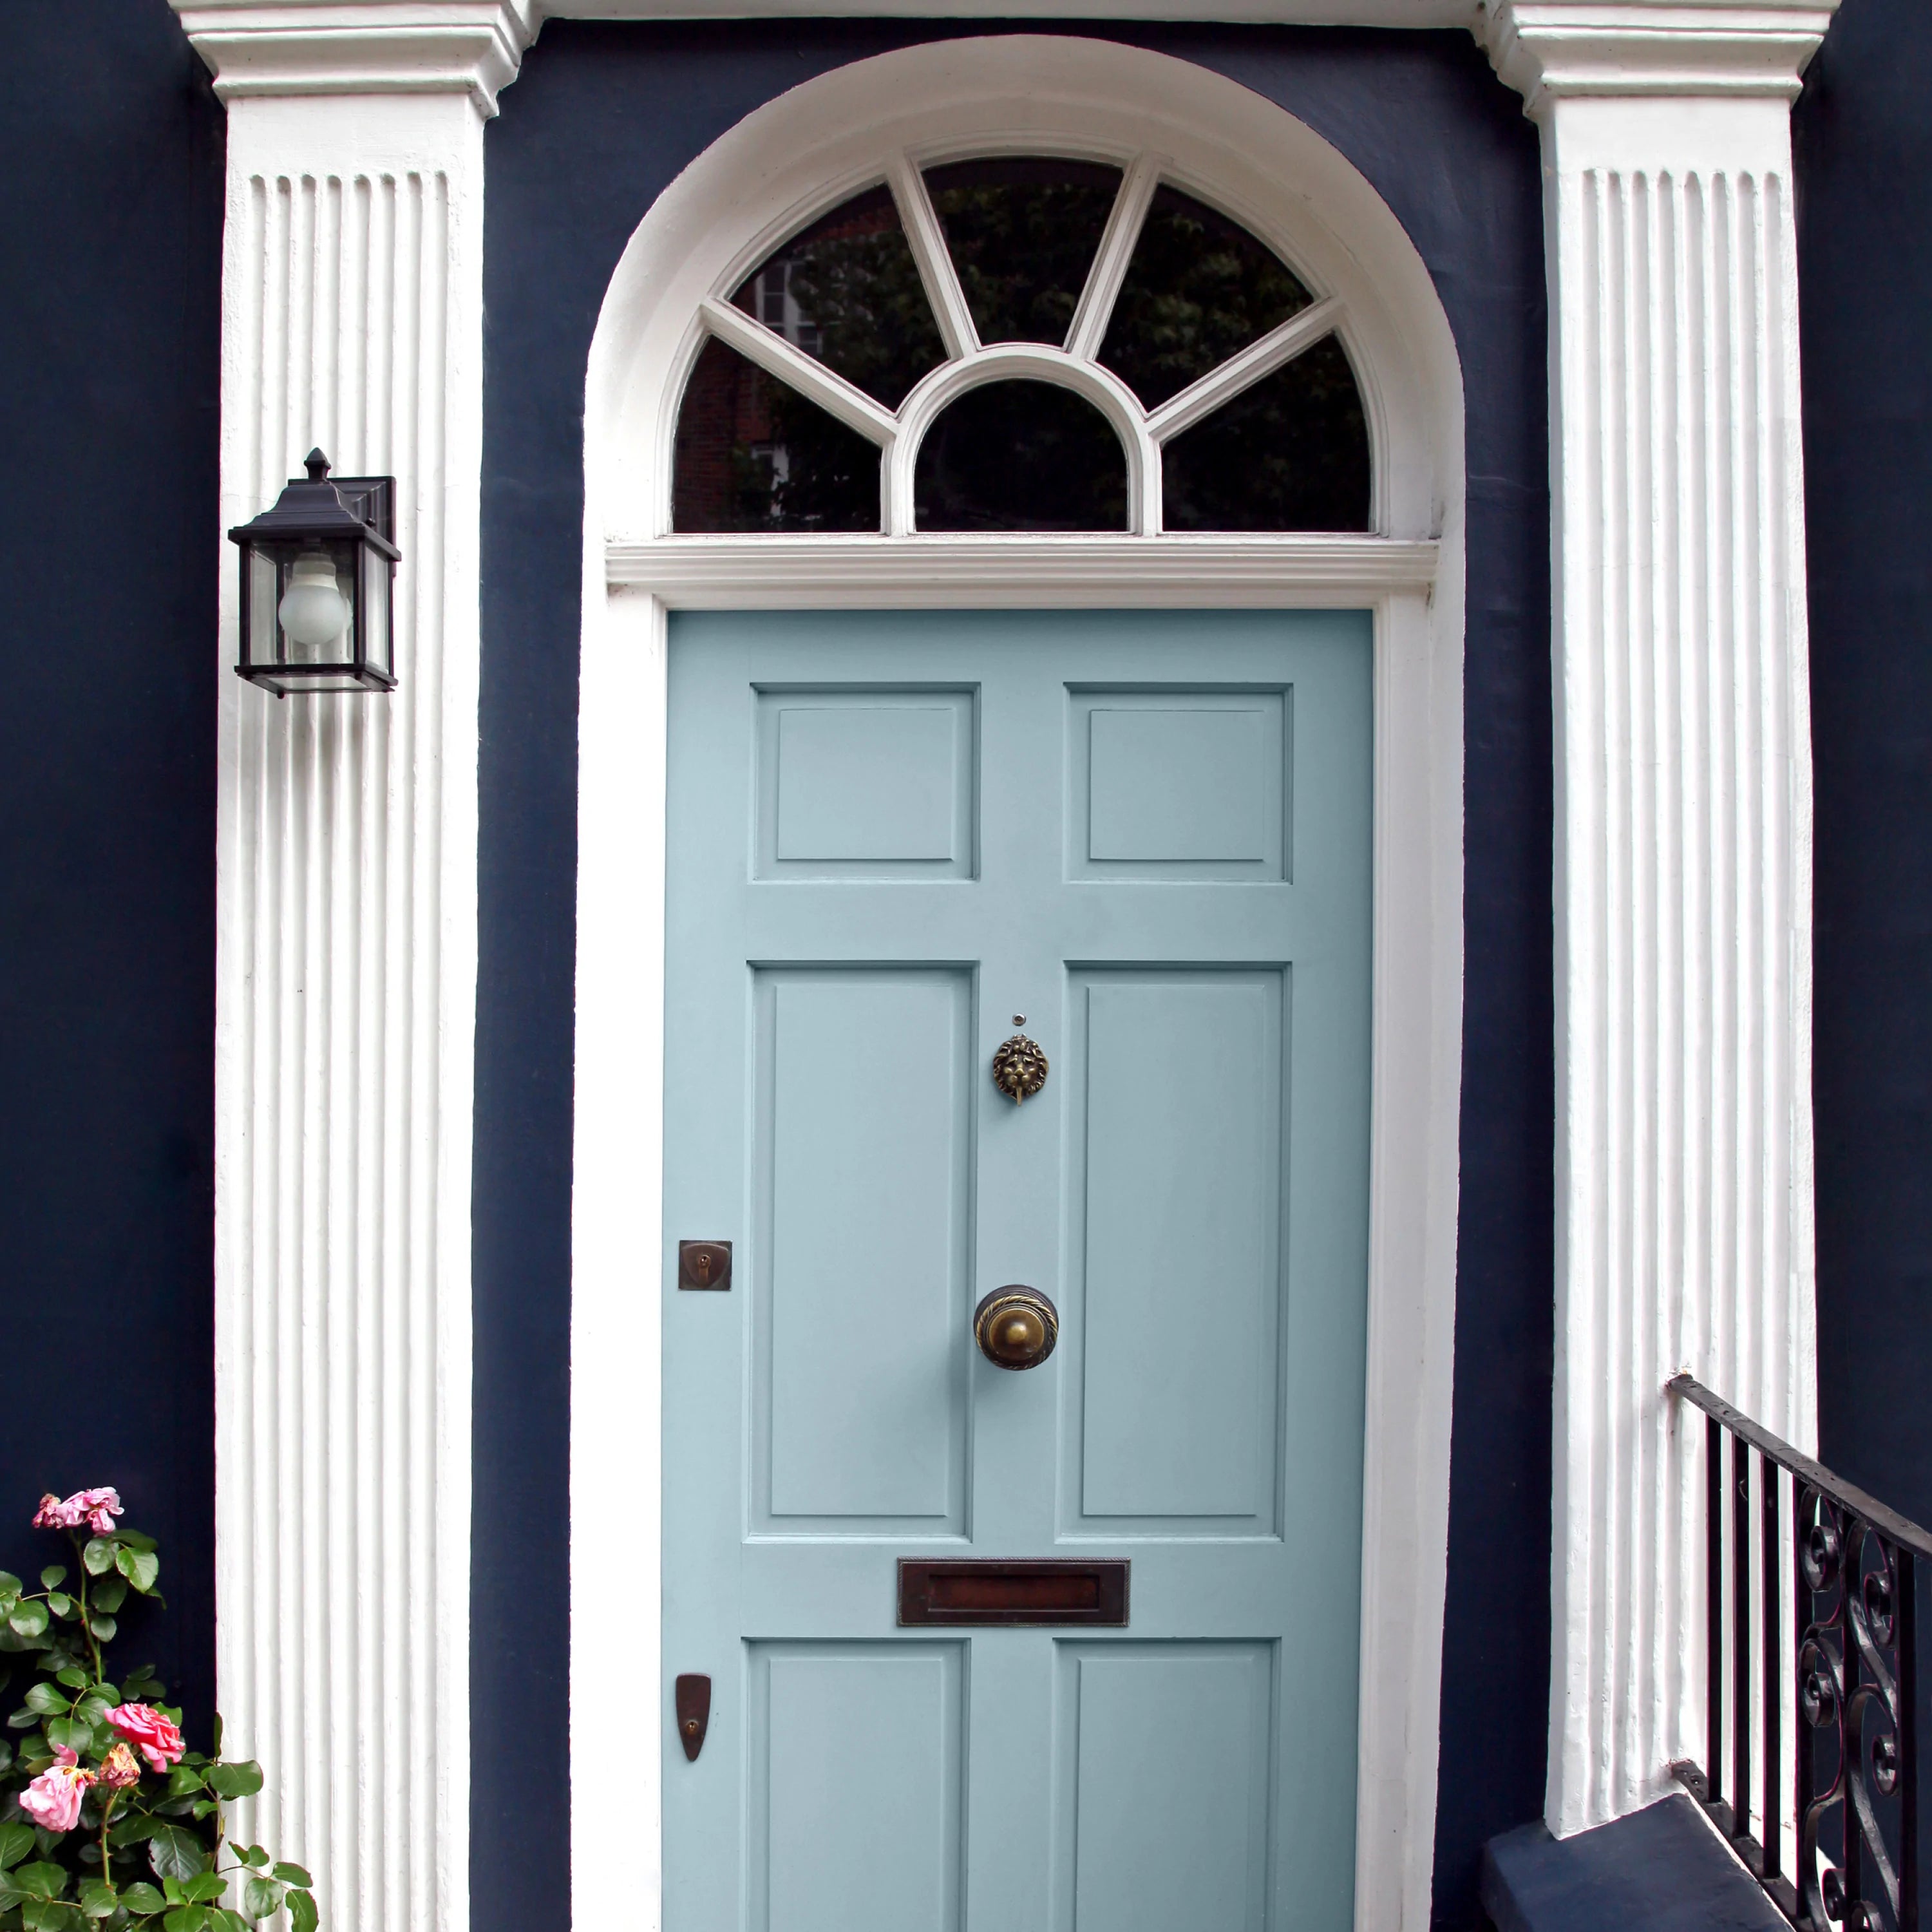 Colourtrend Grey Door | Same Day Dublin and Nationwide Paint in Ireland Delivery by Weirs of Baggot Street - Official Colourtrend Stockist